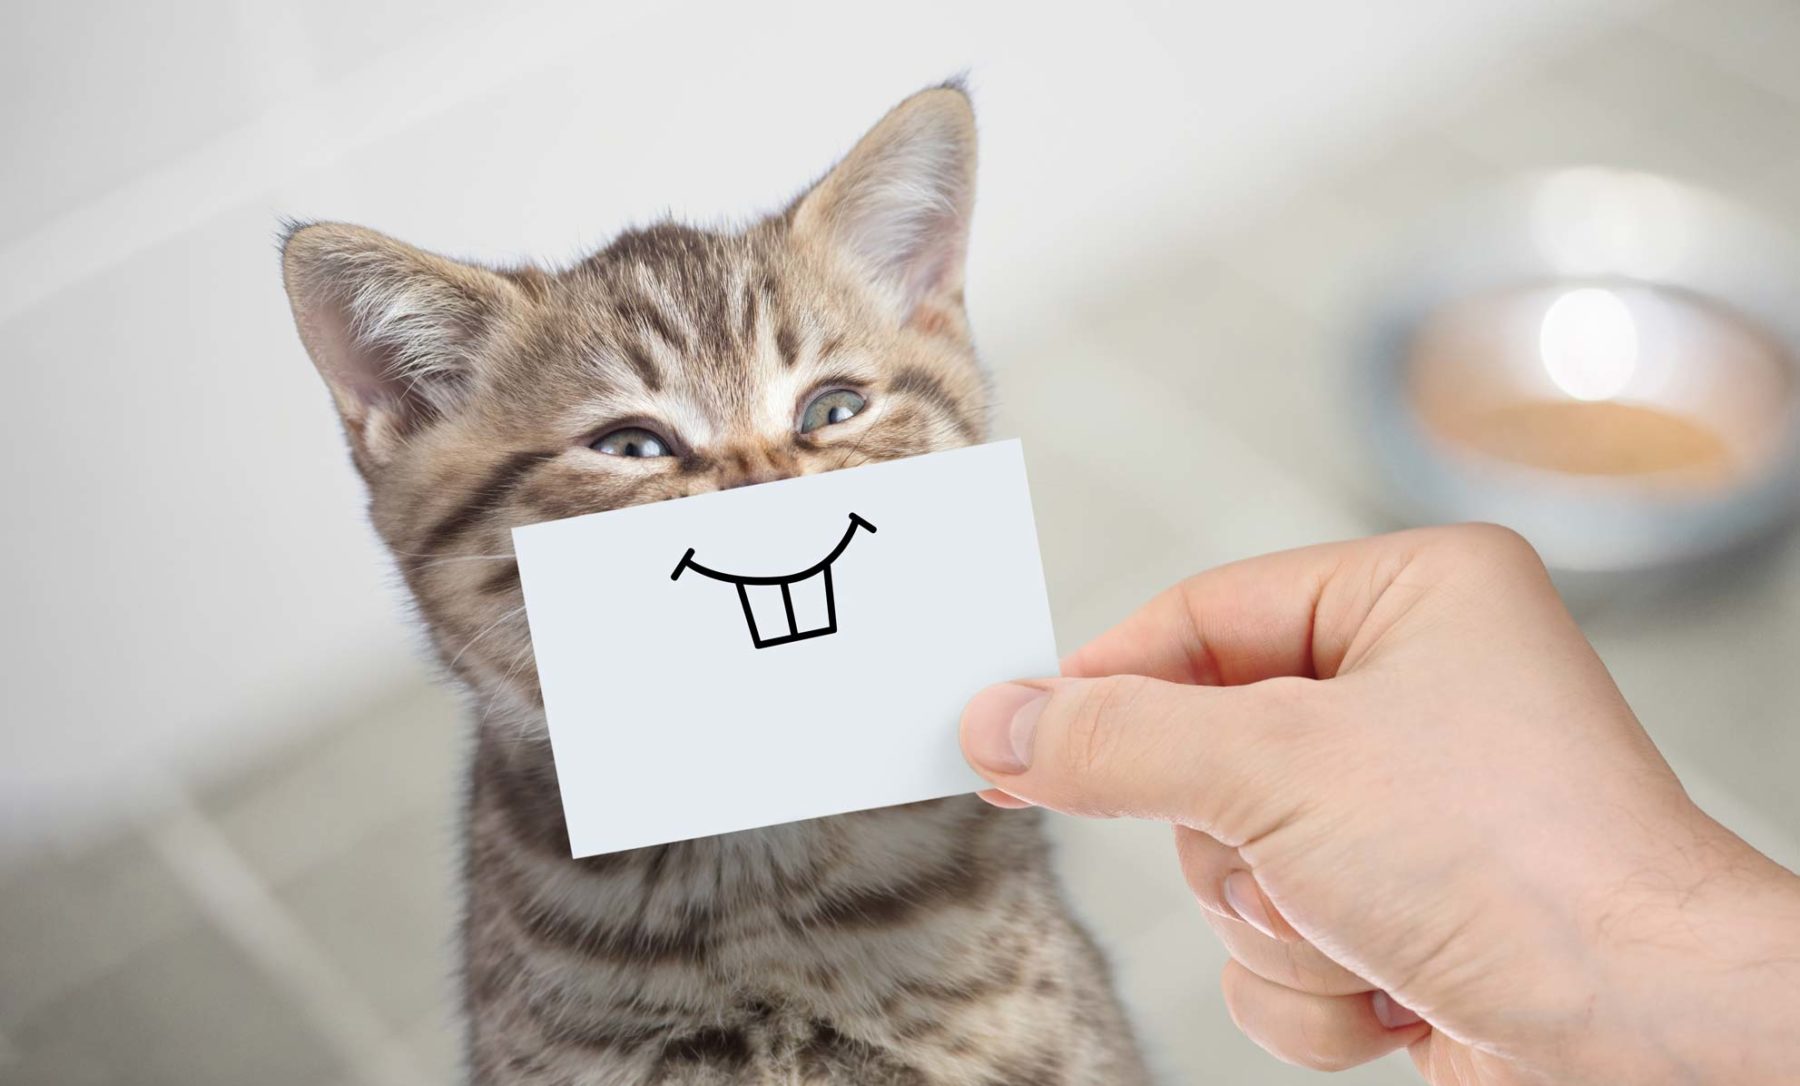 Kitten with human holding a drawing of twi cartoon teeth in front of mouth